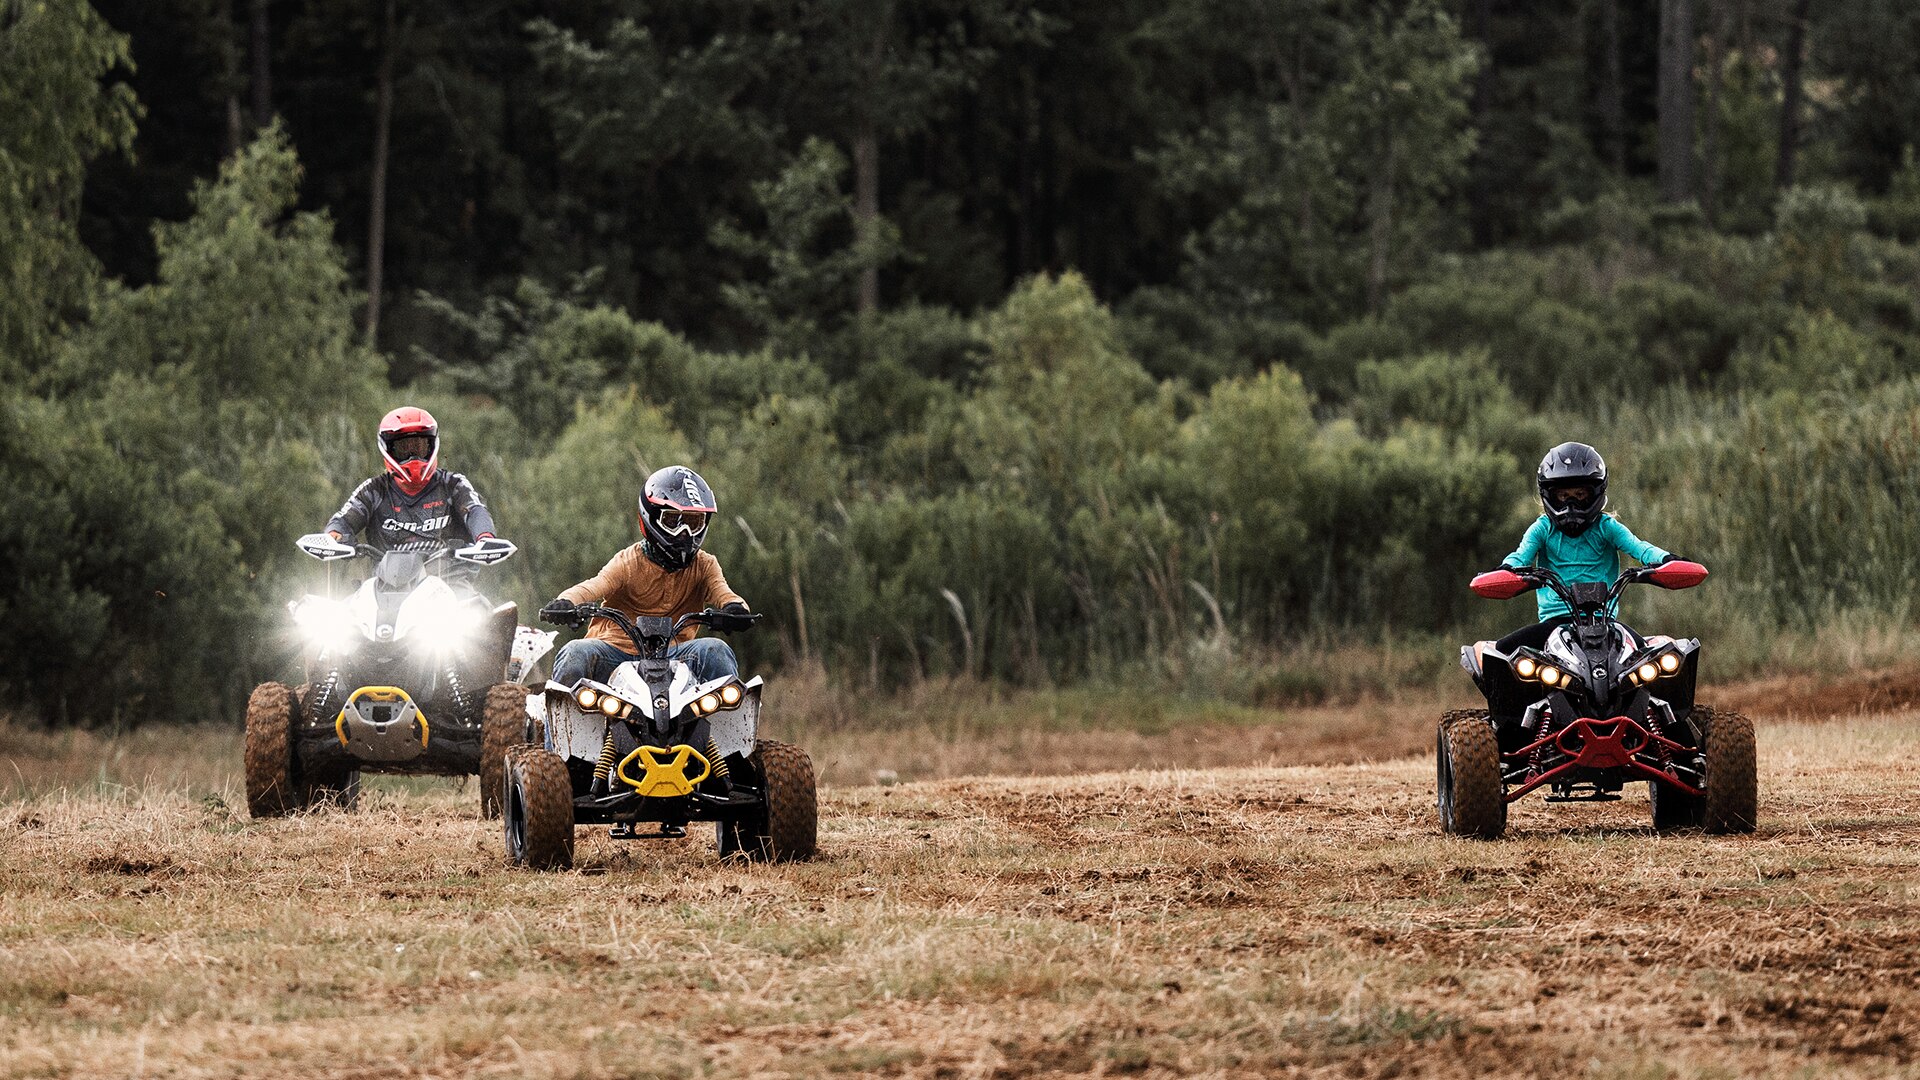 Can-Am riders driving around on ATVs